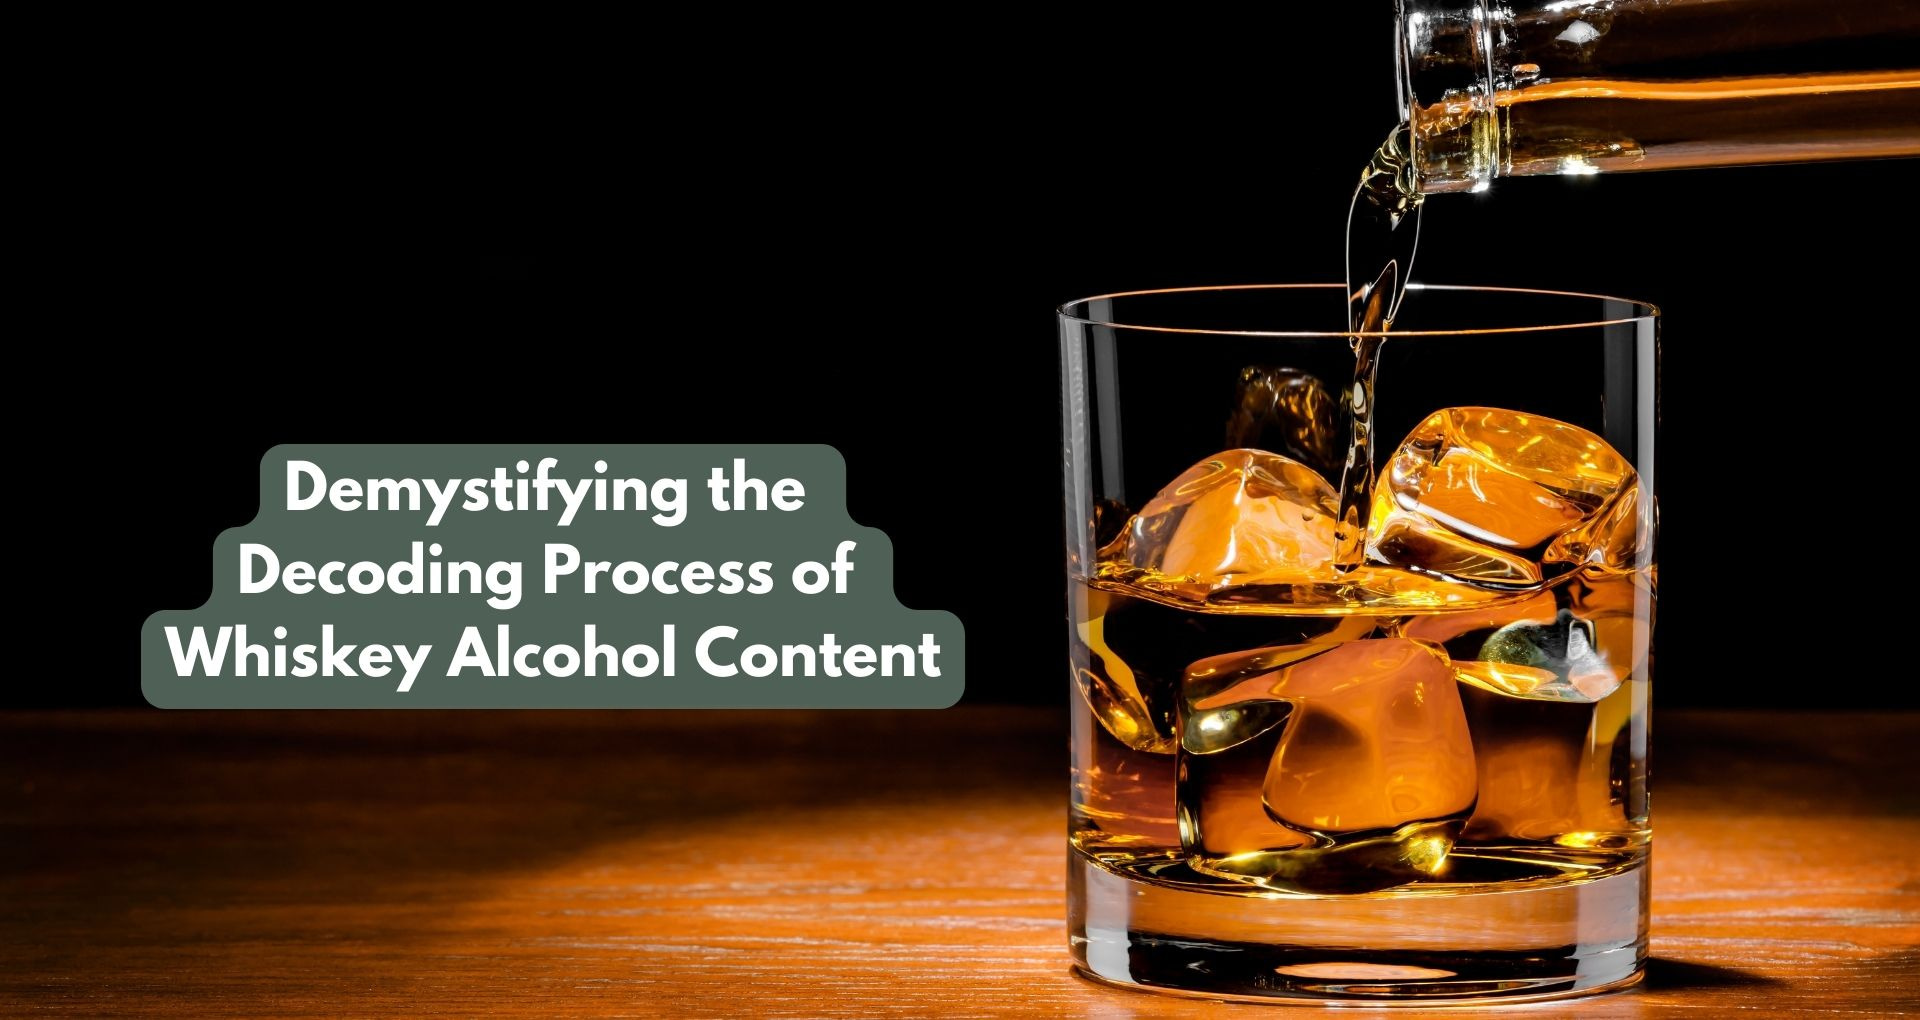 Demystifying the Decoding Process of Whiskey Alcohol Content